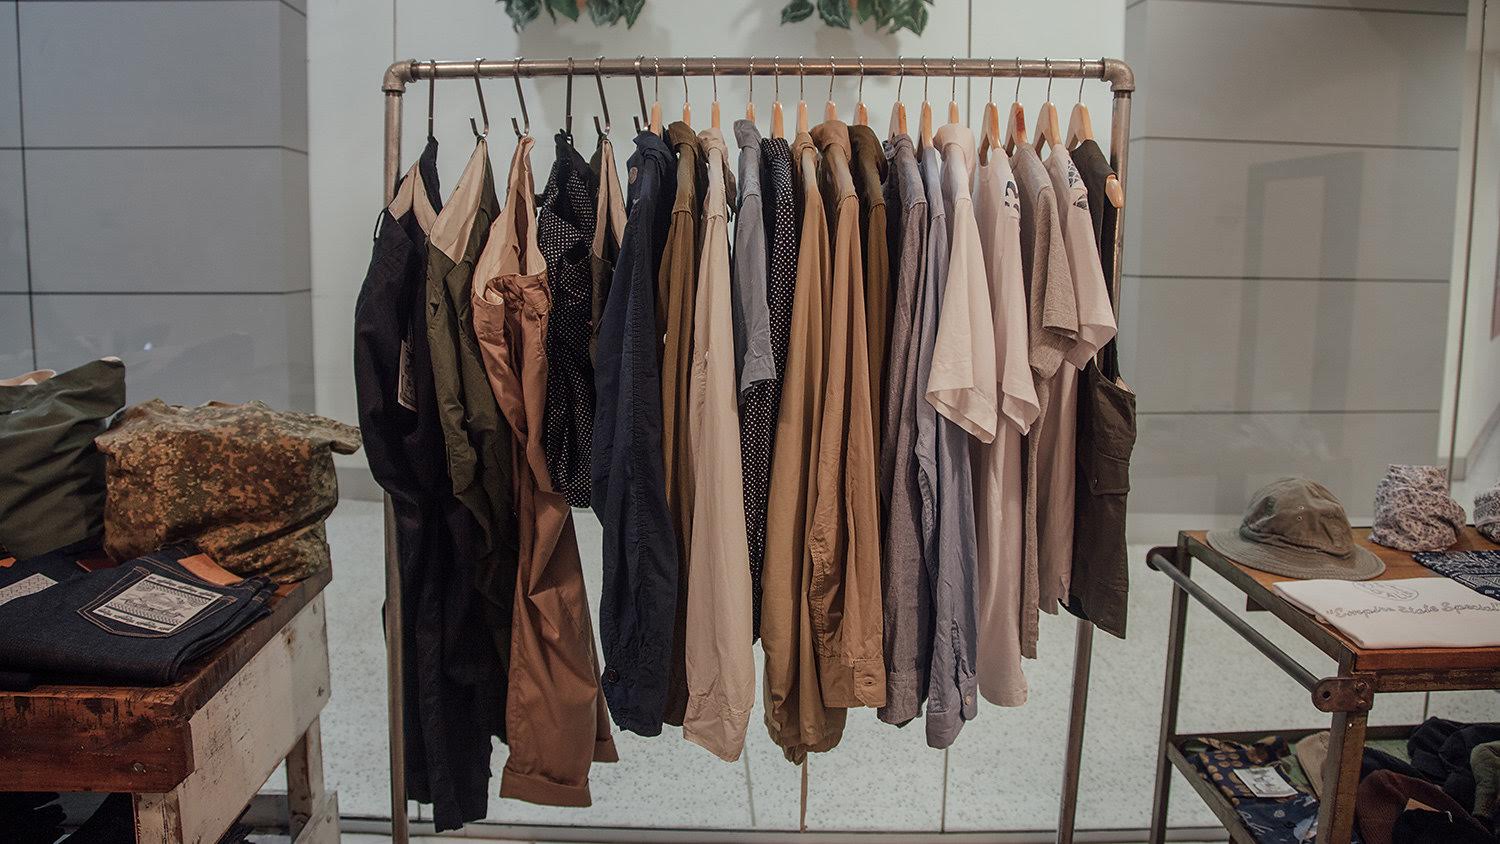 Clothes hanging on racks.